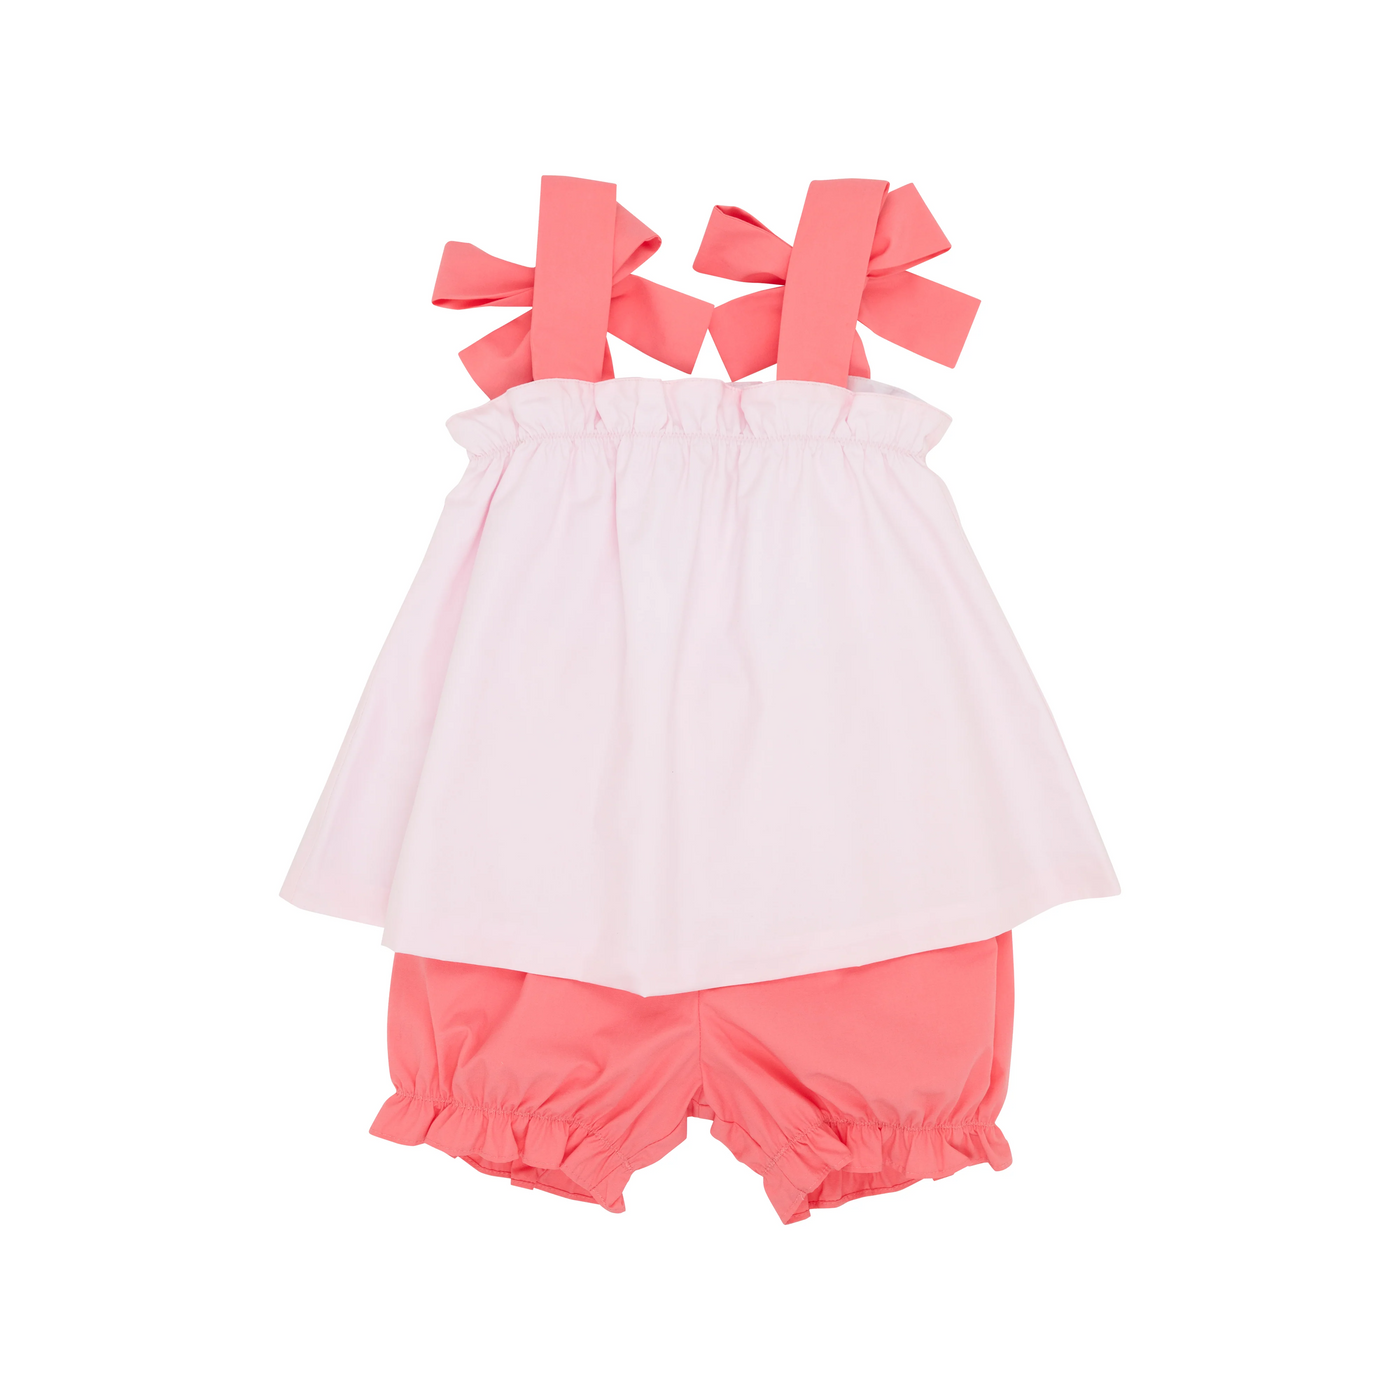 Lainey's Little Set - Palm Beach Pink With Parrot Cay Coral